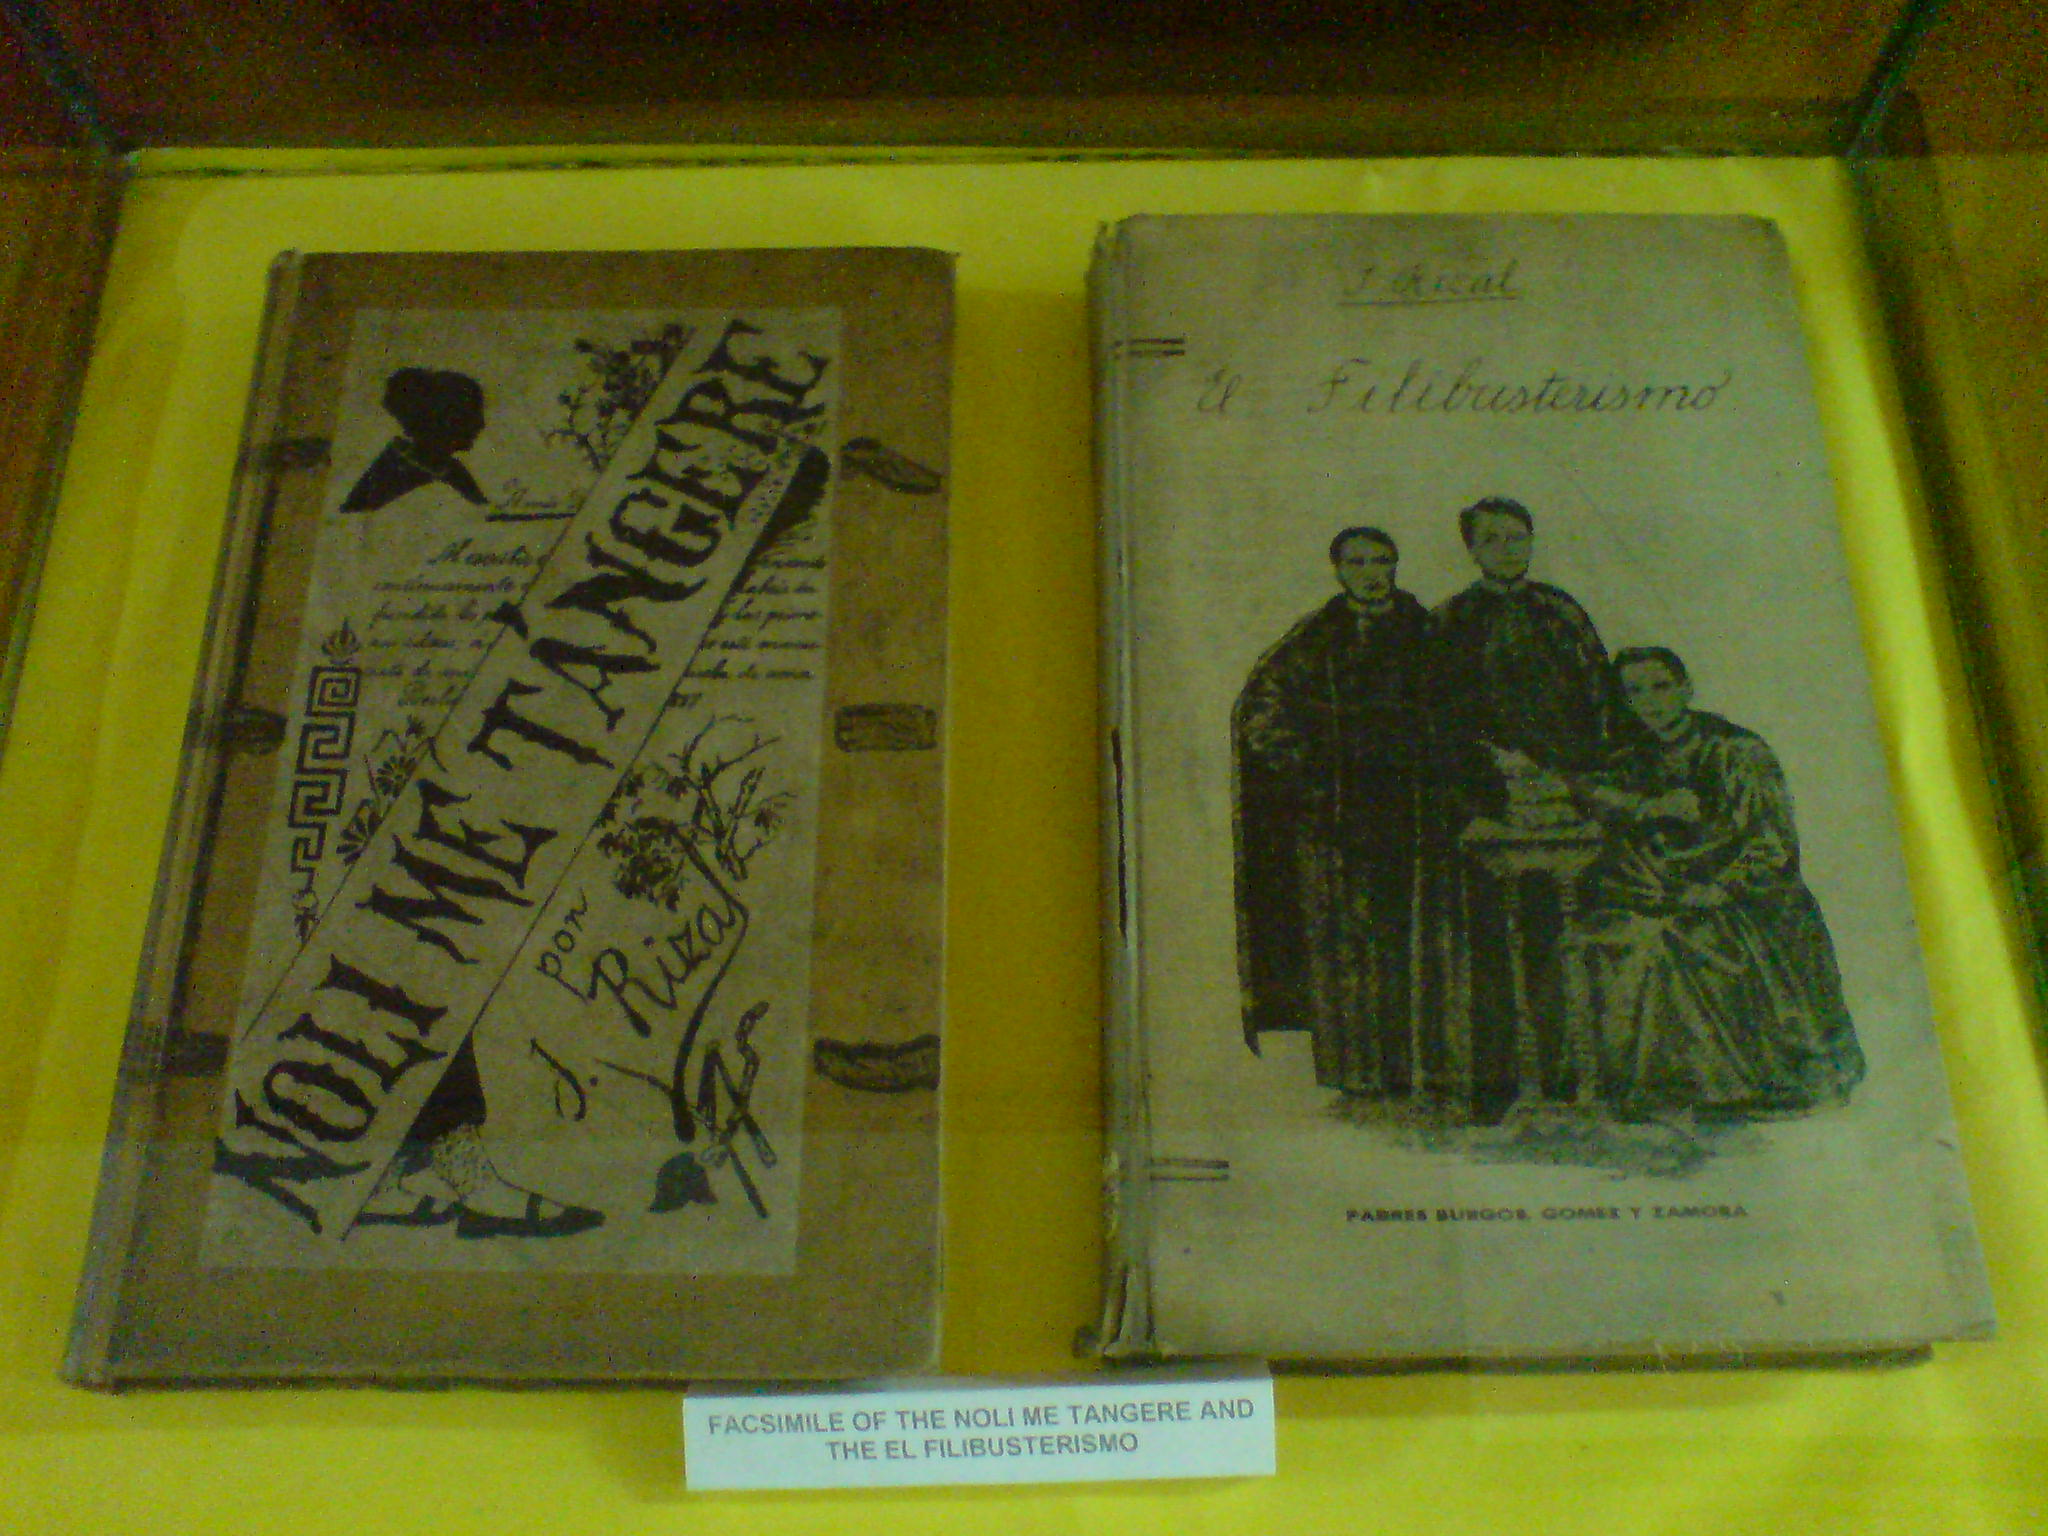 Facsimile copies of Noli Me Tangere and El filibusterismo displayed at the Filipiniana Reading Room of the National Library of the Philippines